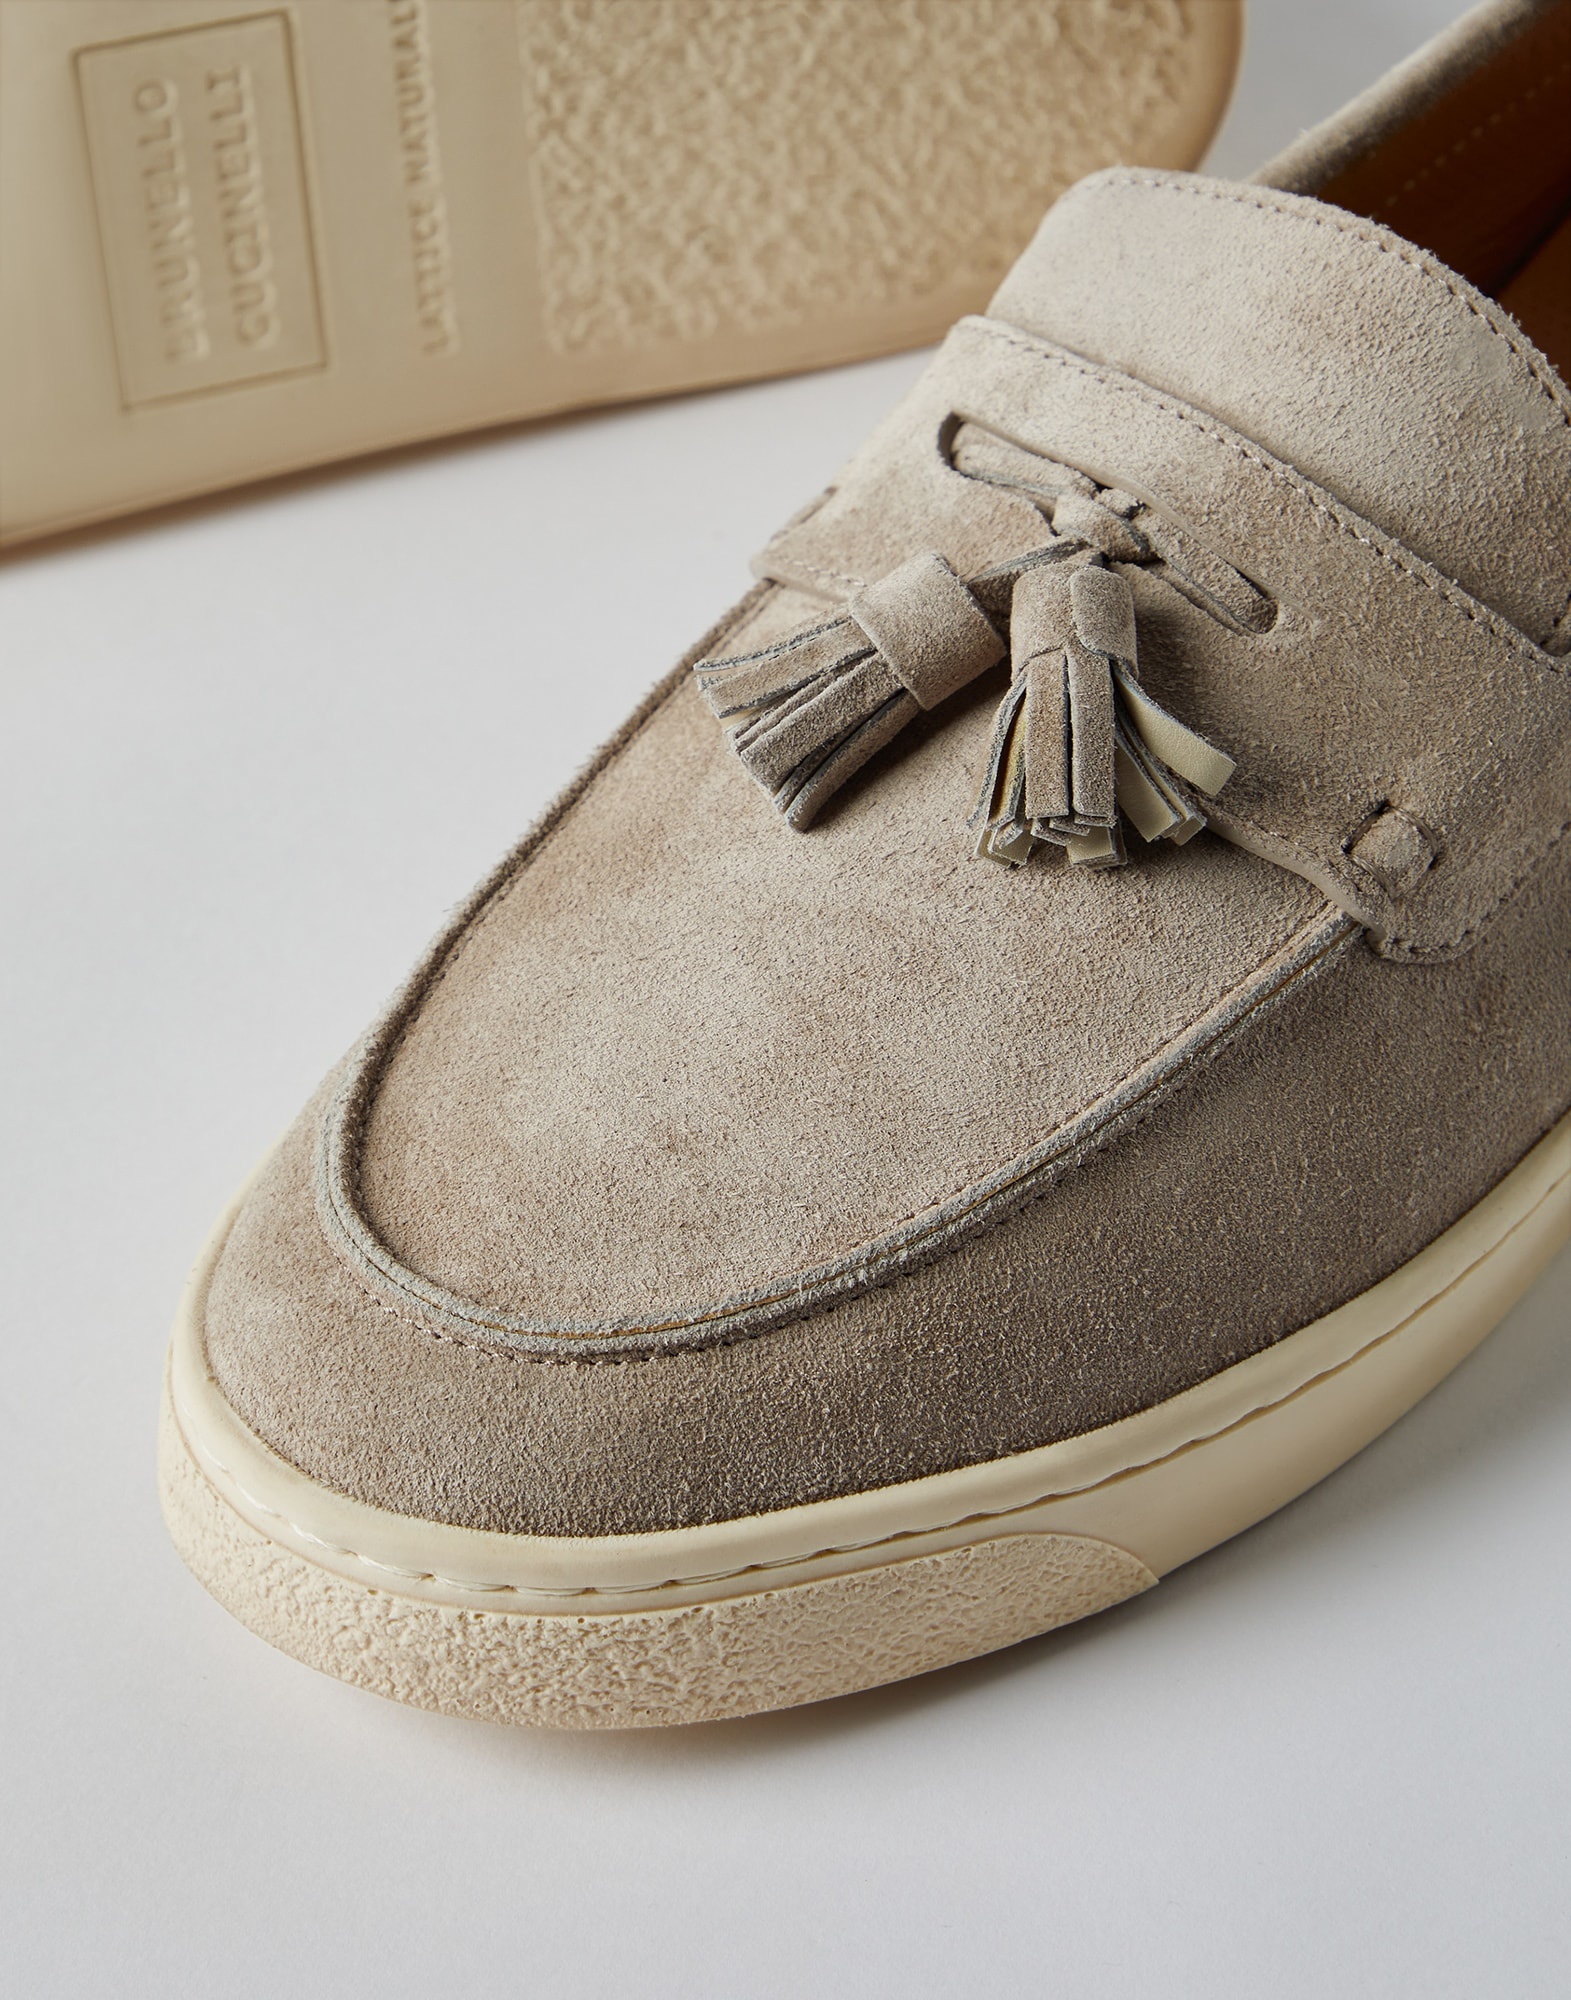 Suede loafer sneakers with tassels and natural rubber sole - 4